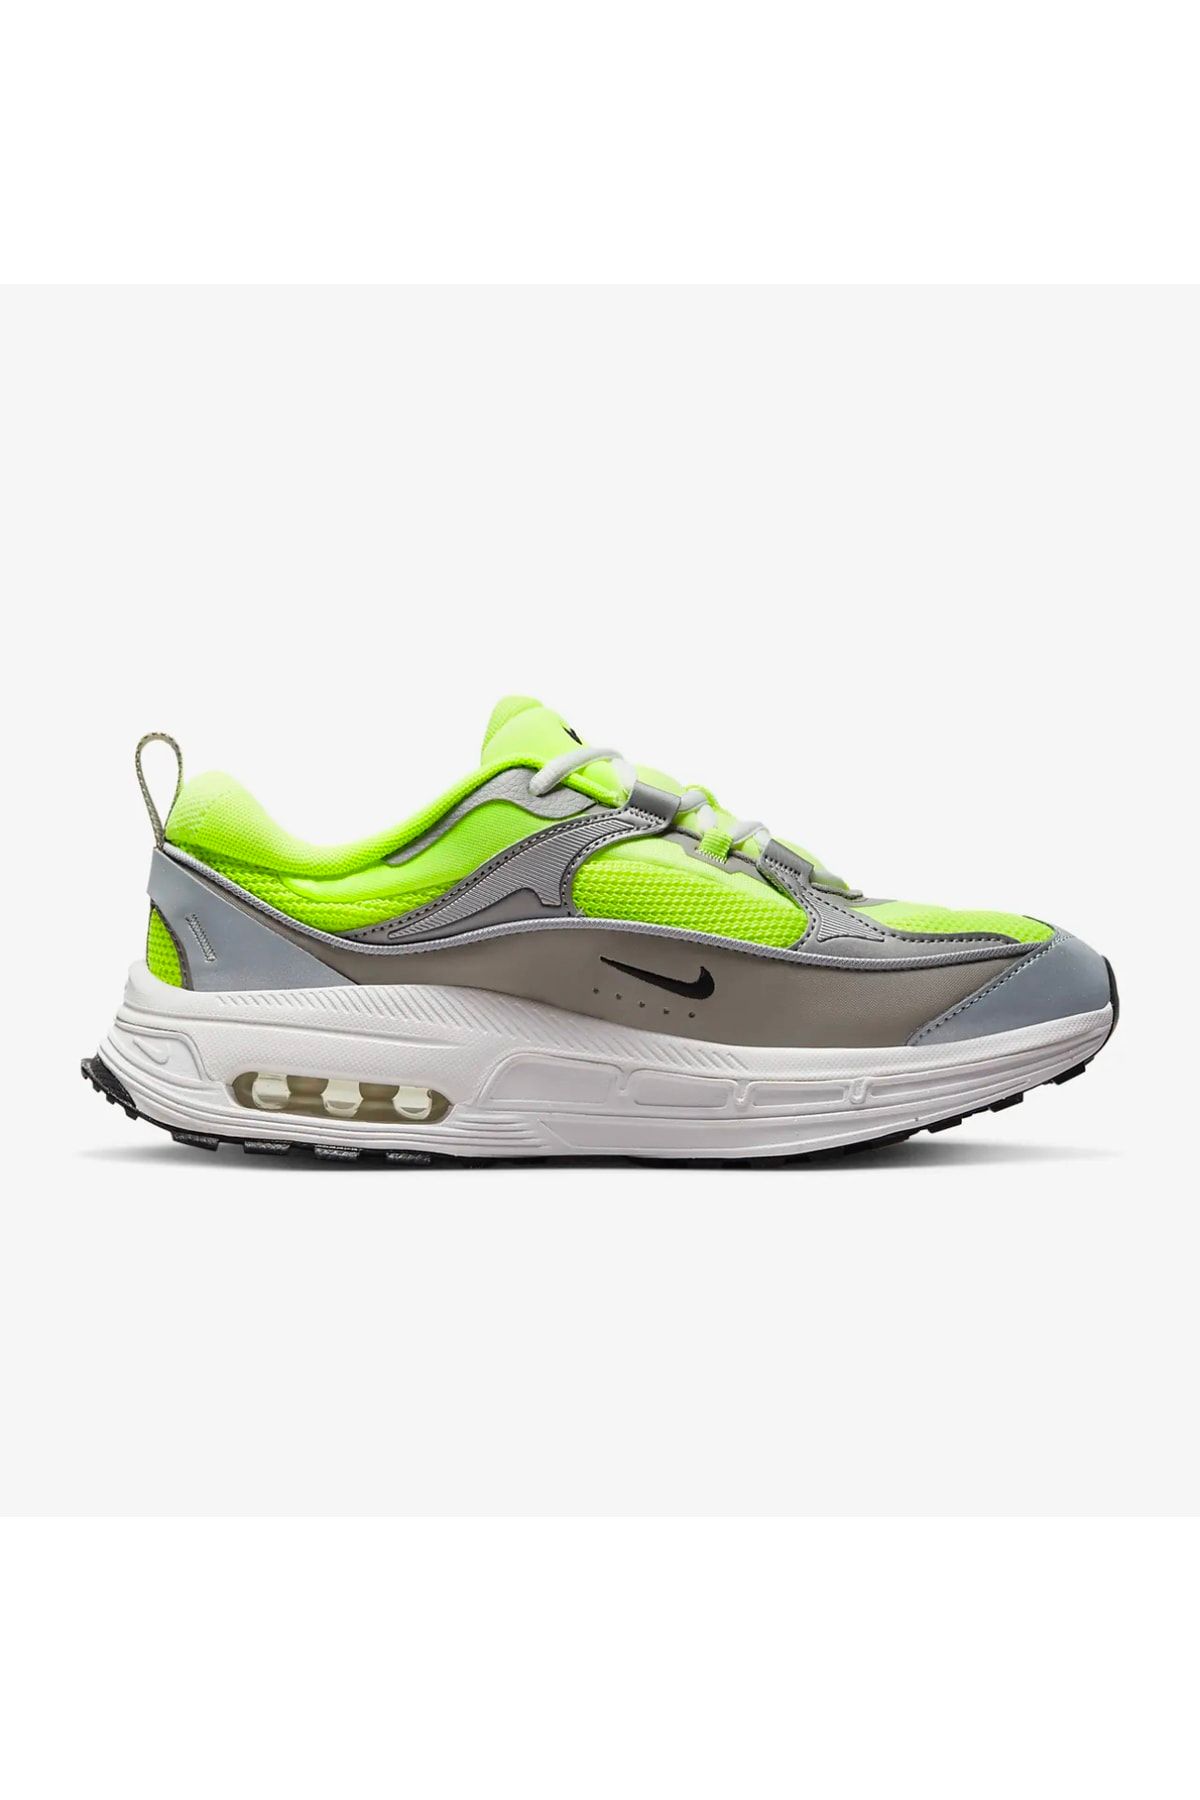 Nike Air Max Bliss Women's Shoes.